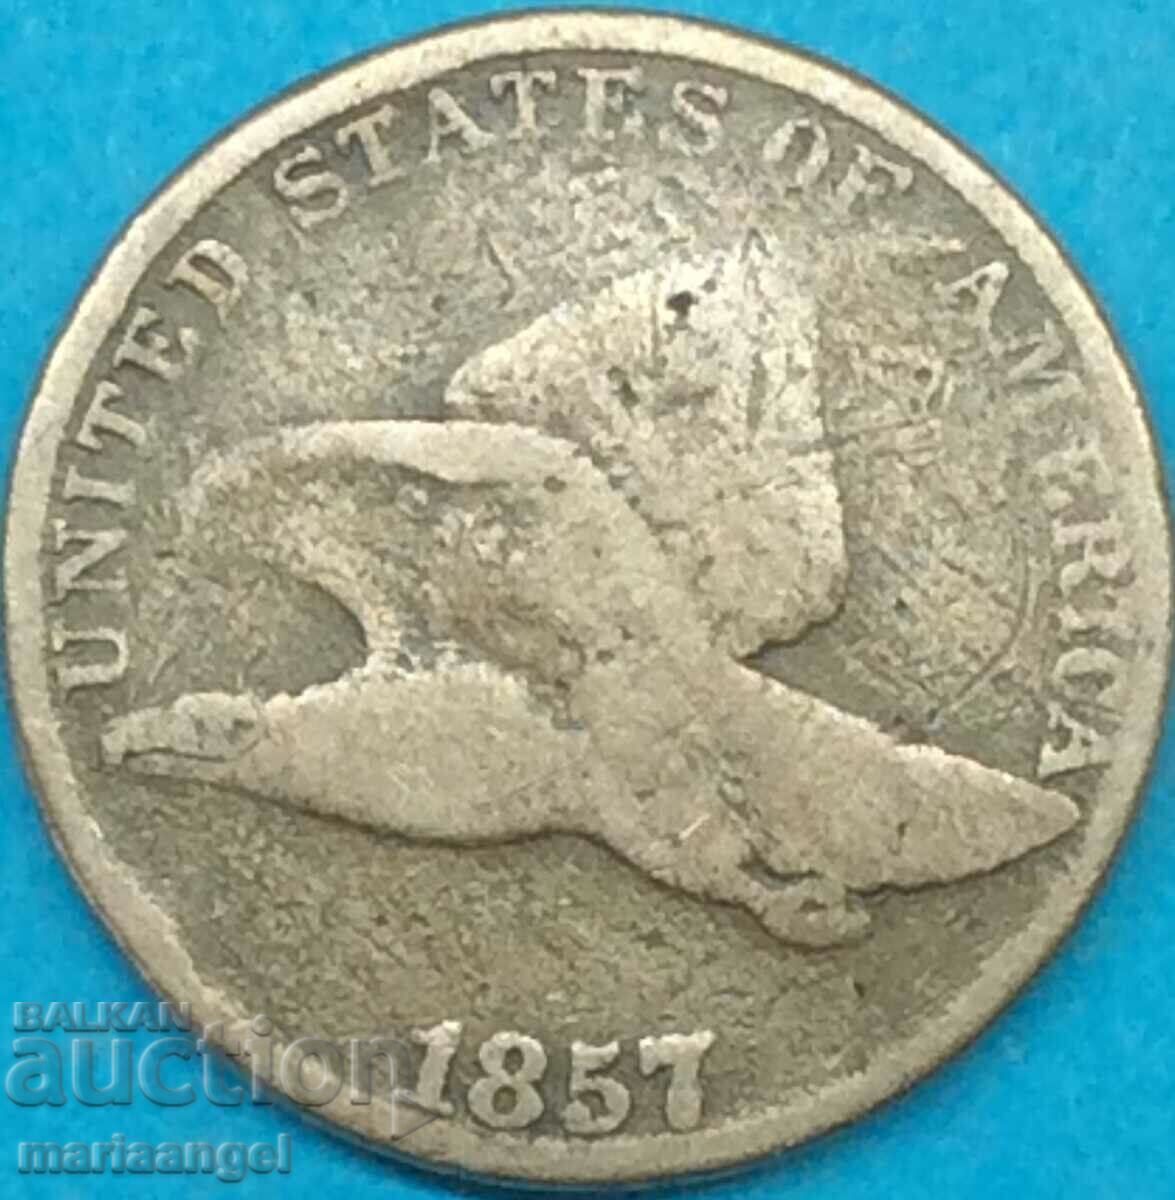 USA 1 cent 1857 "Flying Eagle" copper